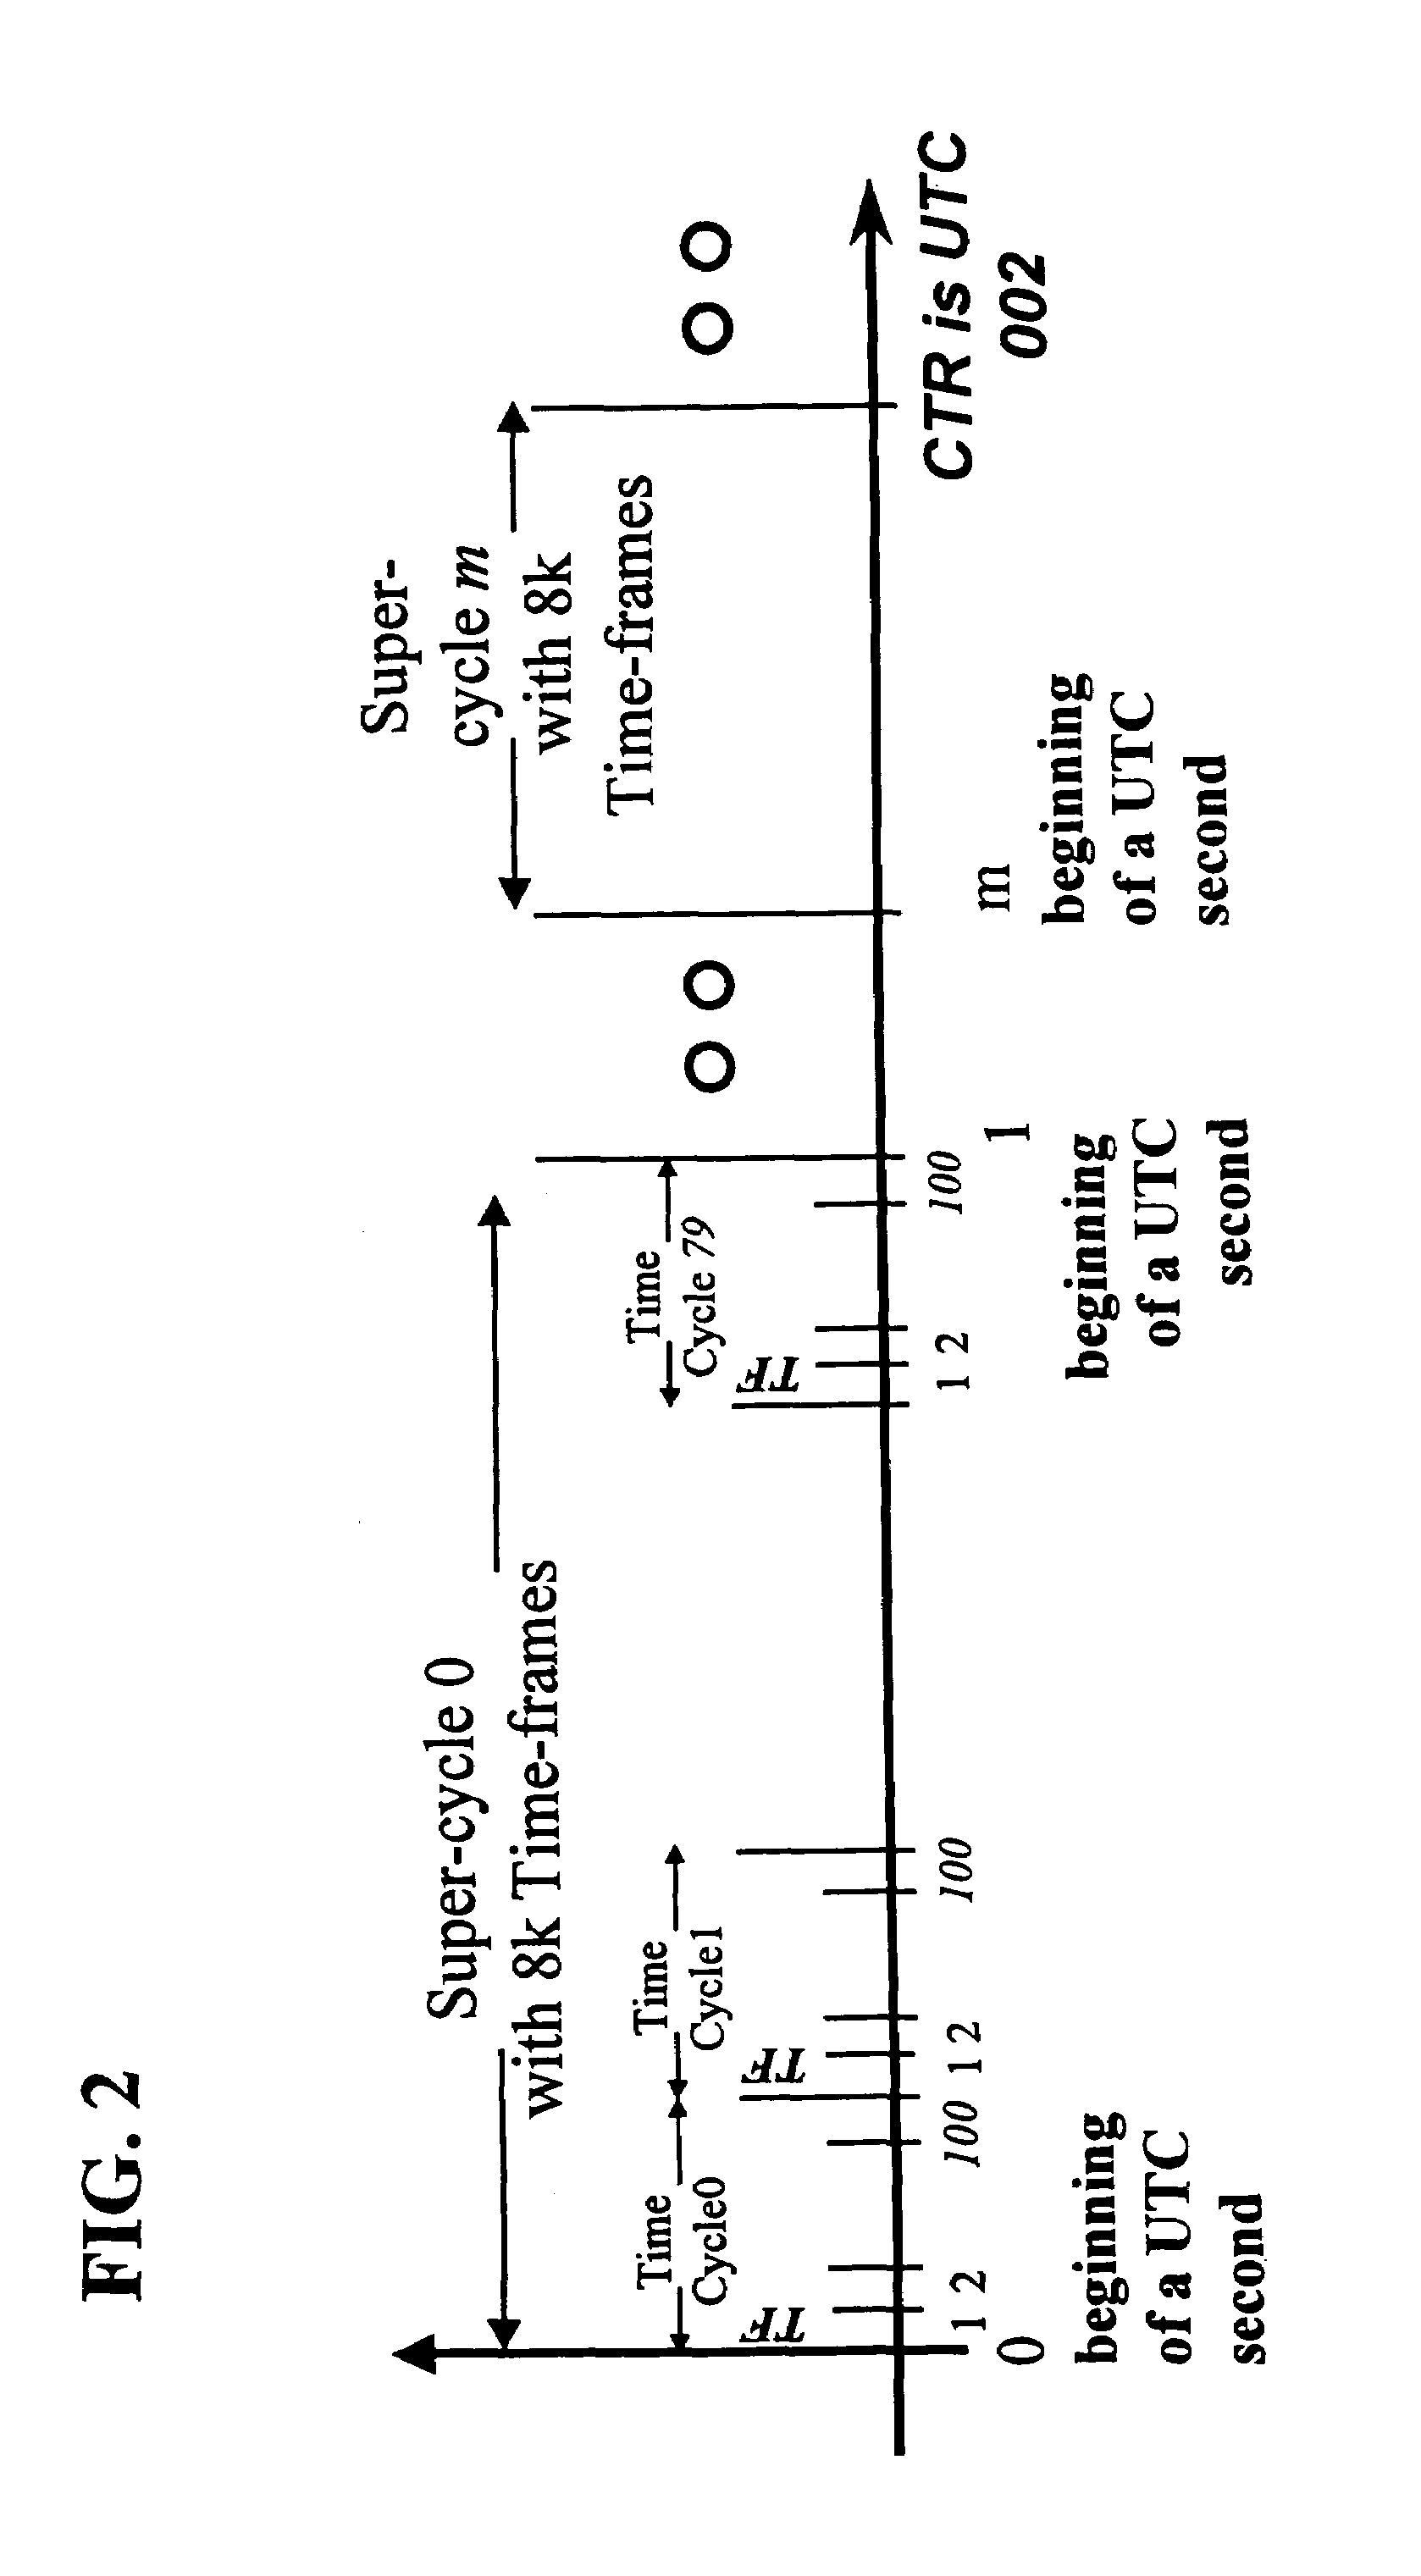 Switching system and methodology having scheduled connection on input and output ports responsive to common time reference